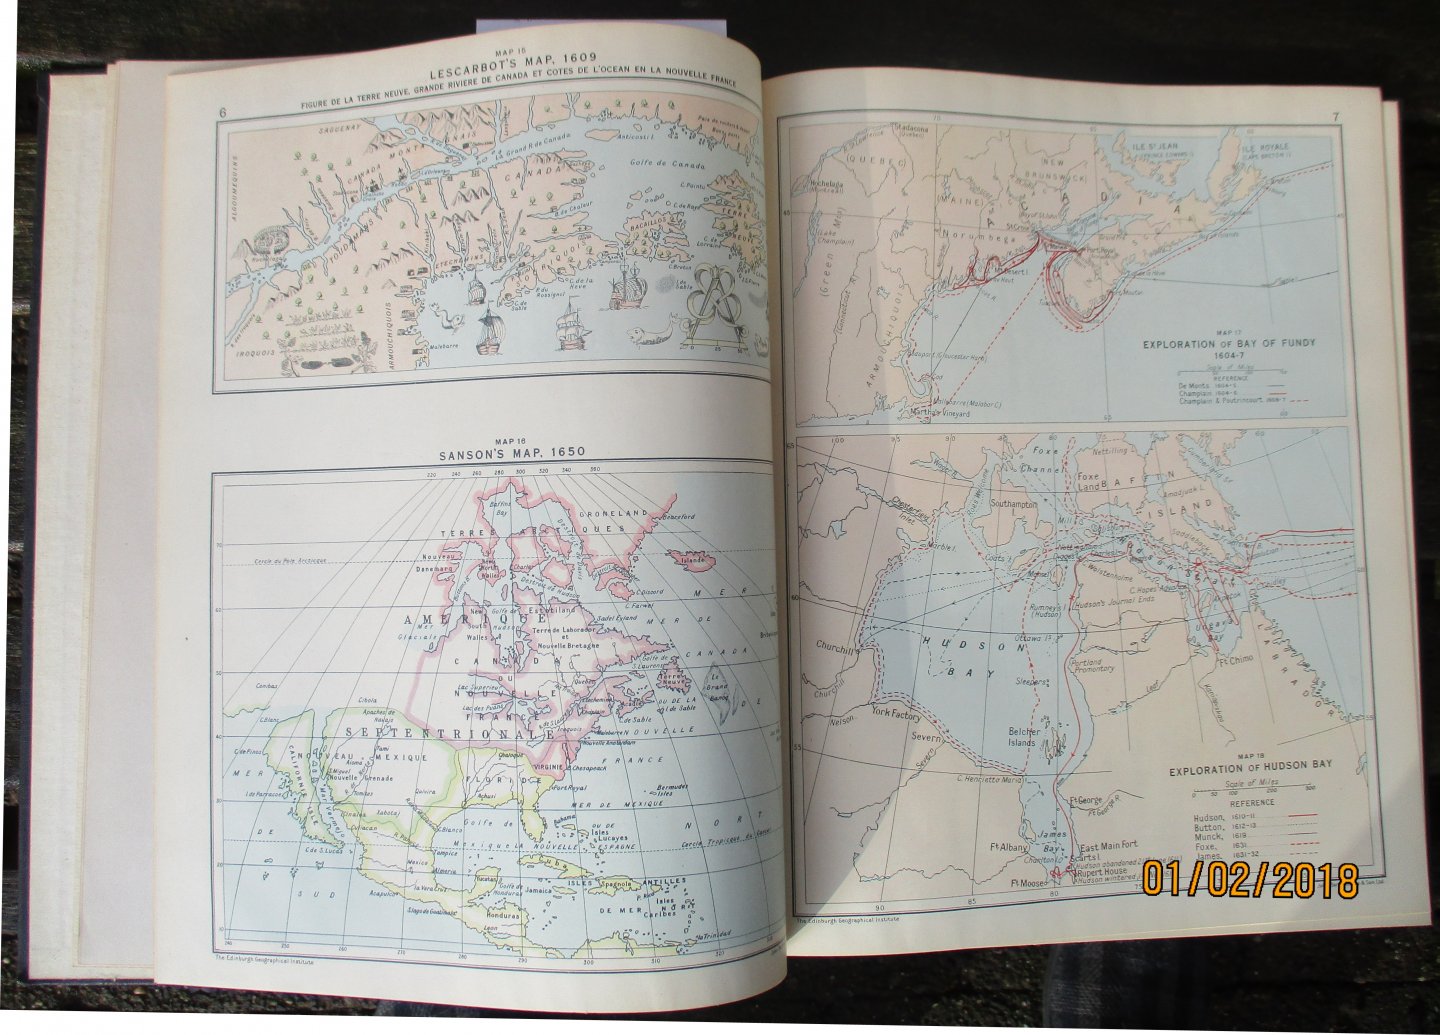 Burpee, L.J. - An historical atlas of Canada; with introduction notes and chronological tables.